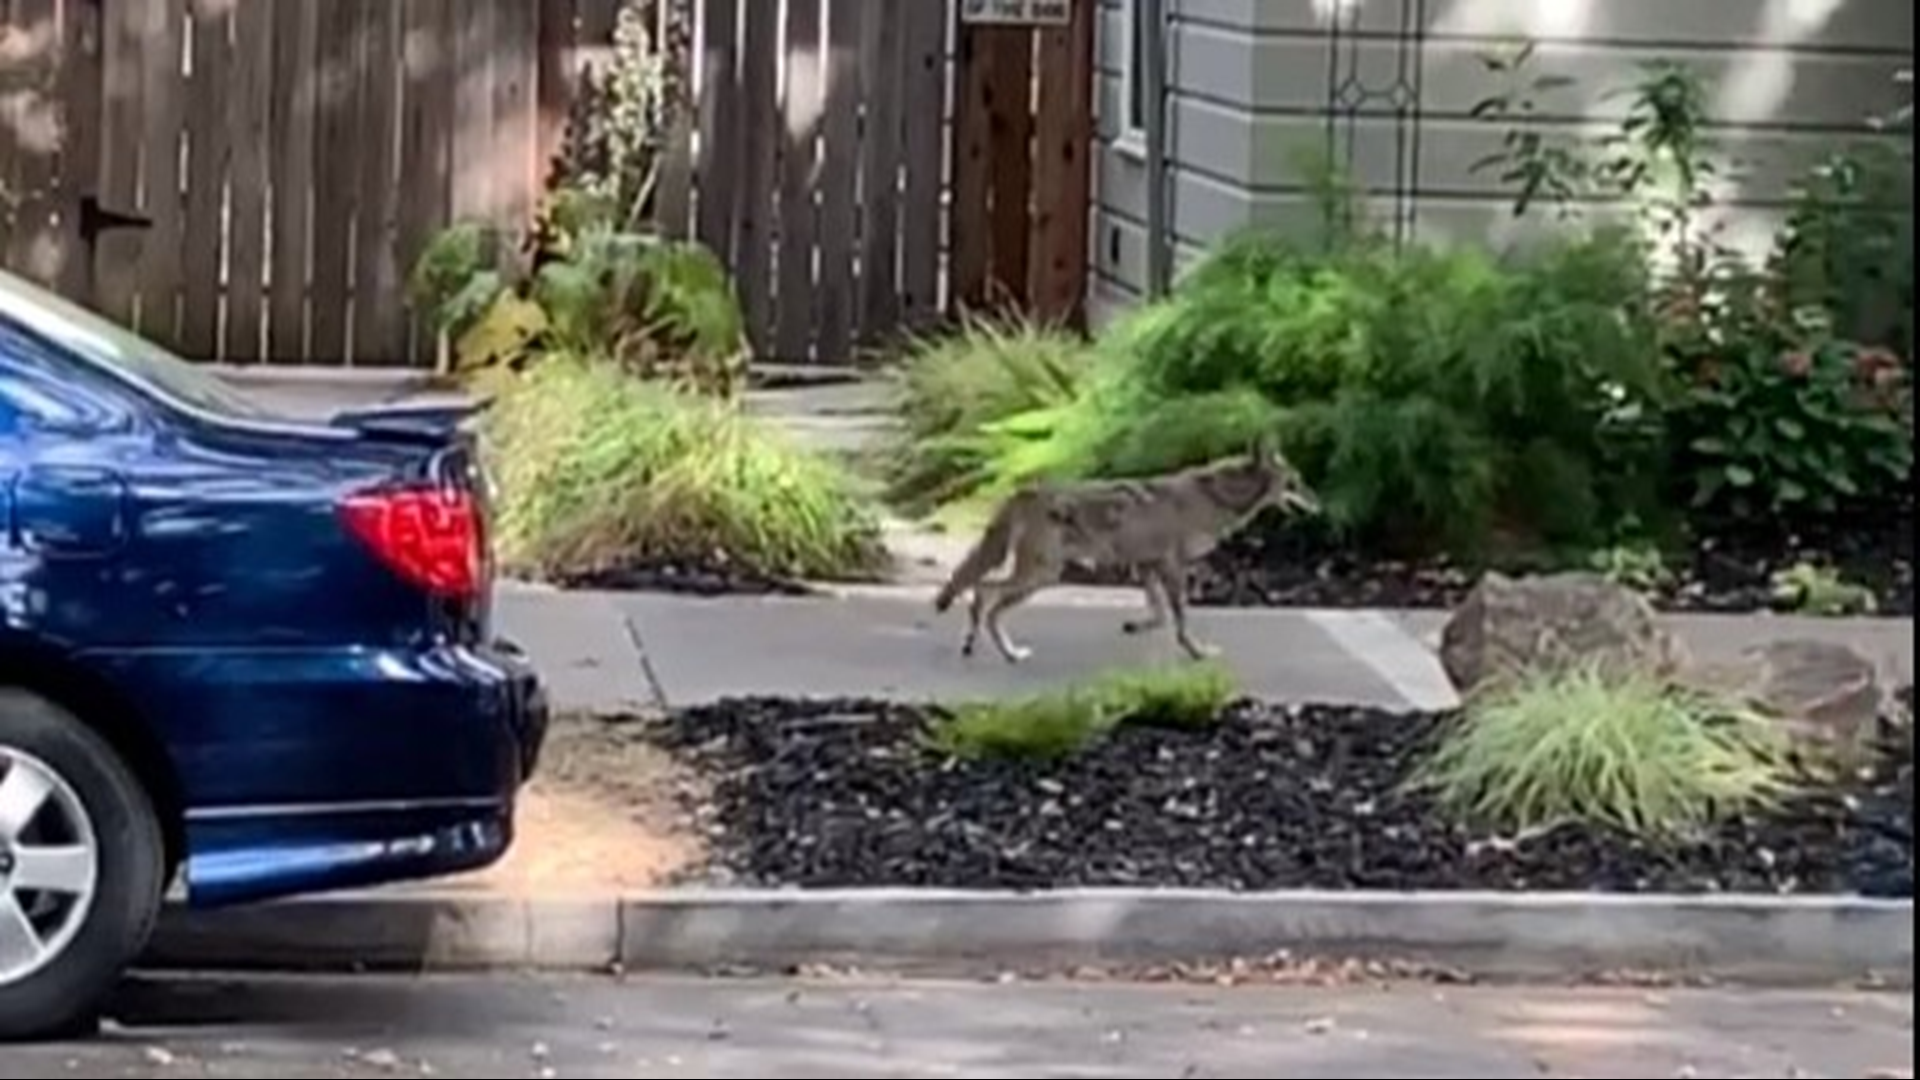 A coyote spotted in Midtown Sacramento has people concerned but Fish and Wildlife officials say they are not that rare.